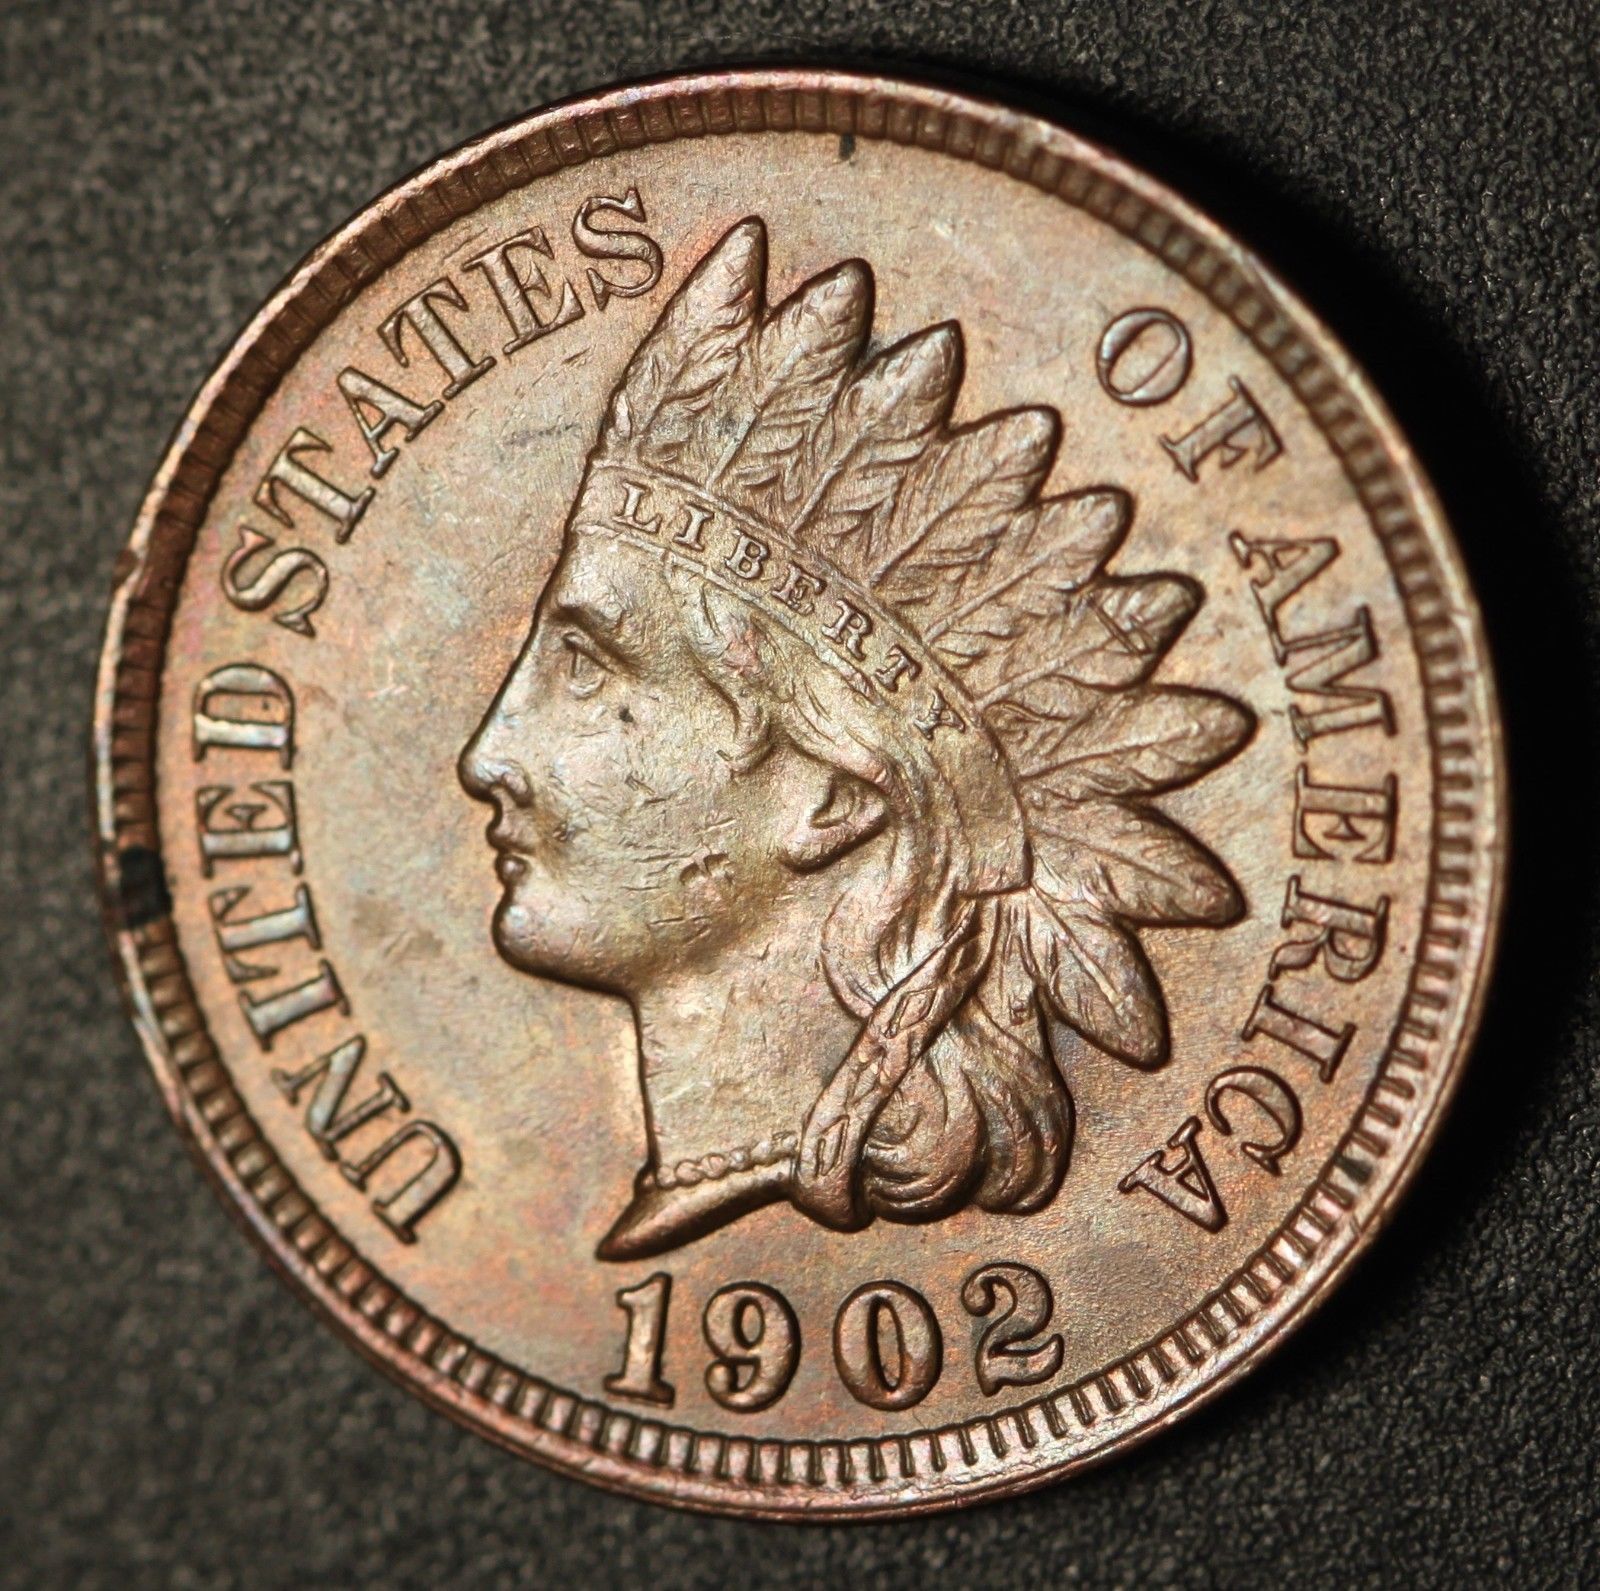 1902 RPD-004 - Indian Head Penny - Photo by Ed Nathanson